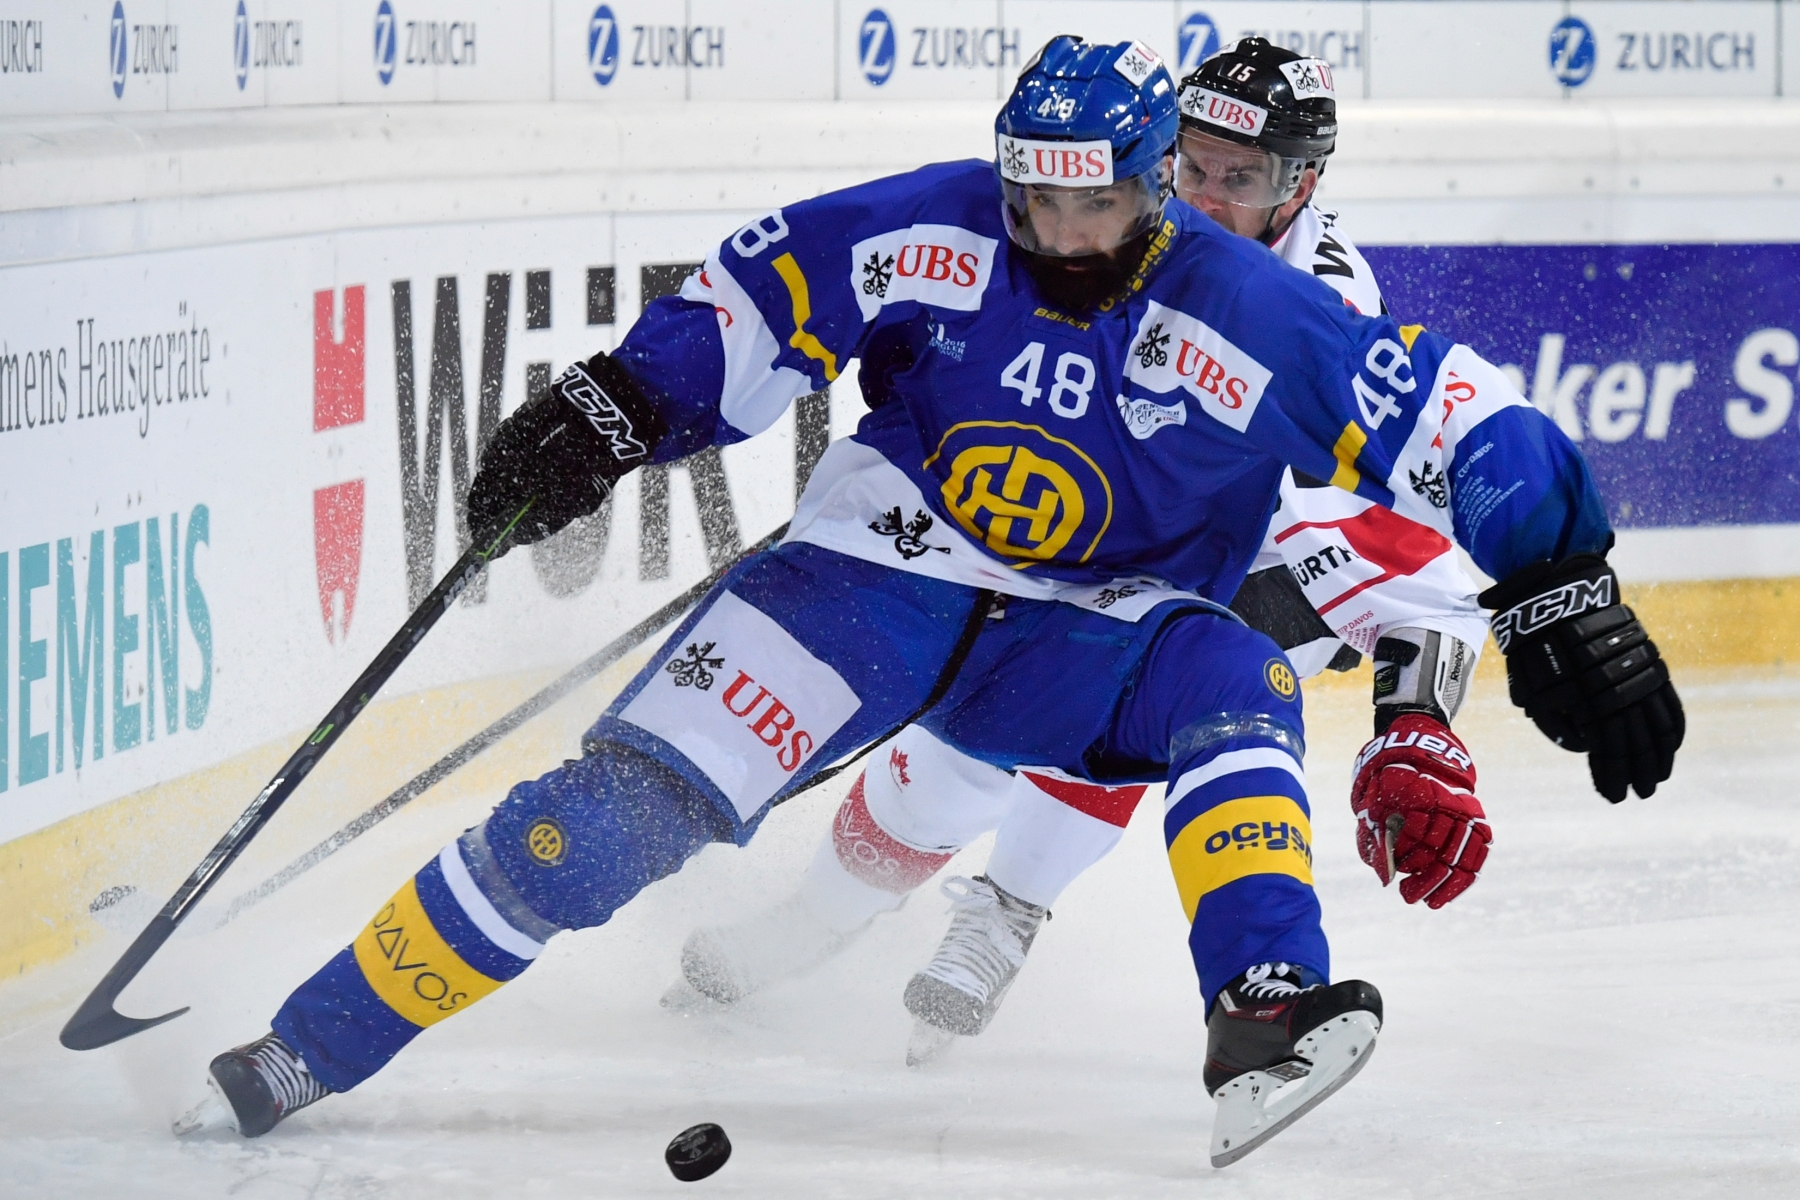 Davos' Daniel Rahimi, left, fights for the puck with Team Canada's Dustin Jeffrey, during the game between HC Davos and Team Canada, at the 90th Spengler Cup ice hockey tournament in Davos, Switzerland, Tuesday, December 27, 2016. (KEYSTONE/Gian Ehrenzeller) EISHOCKEY SPENGLER CUP 2016 DAVOS TEAM CANADA